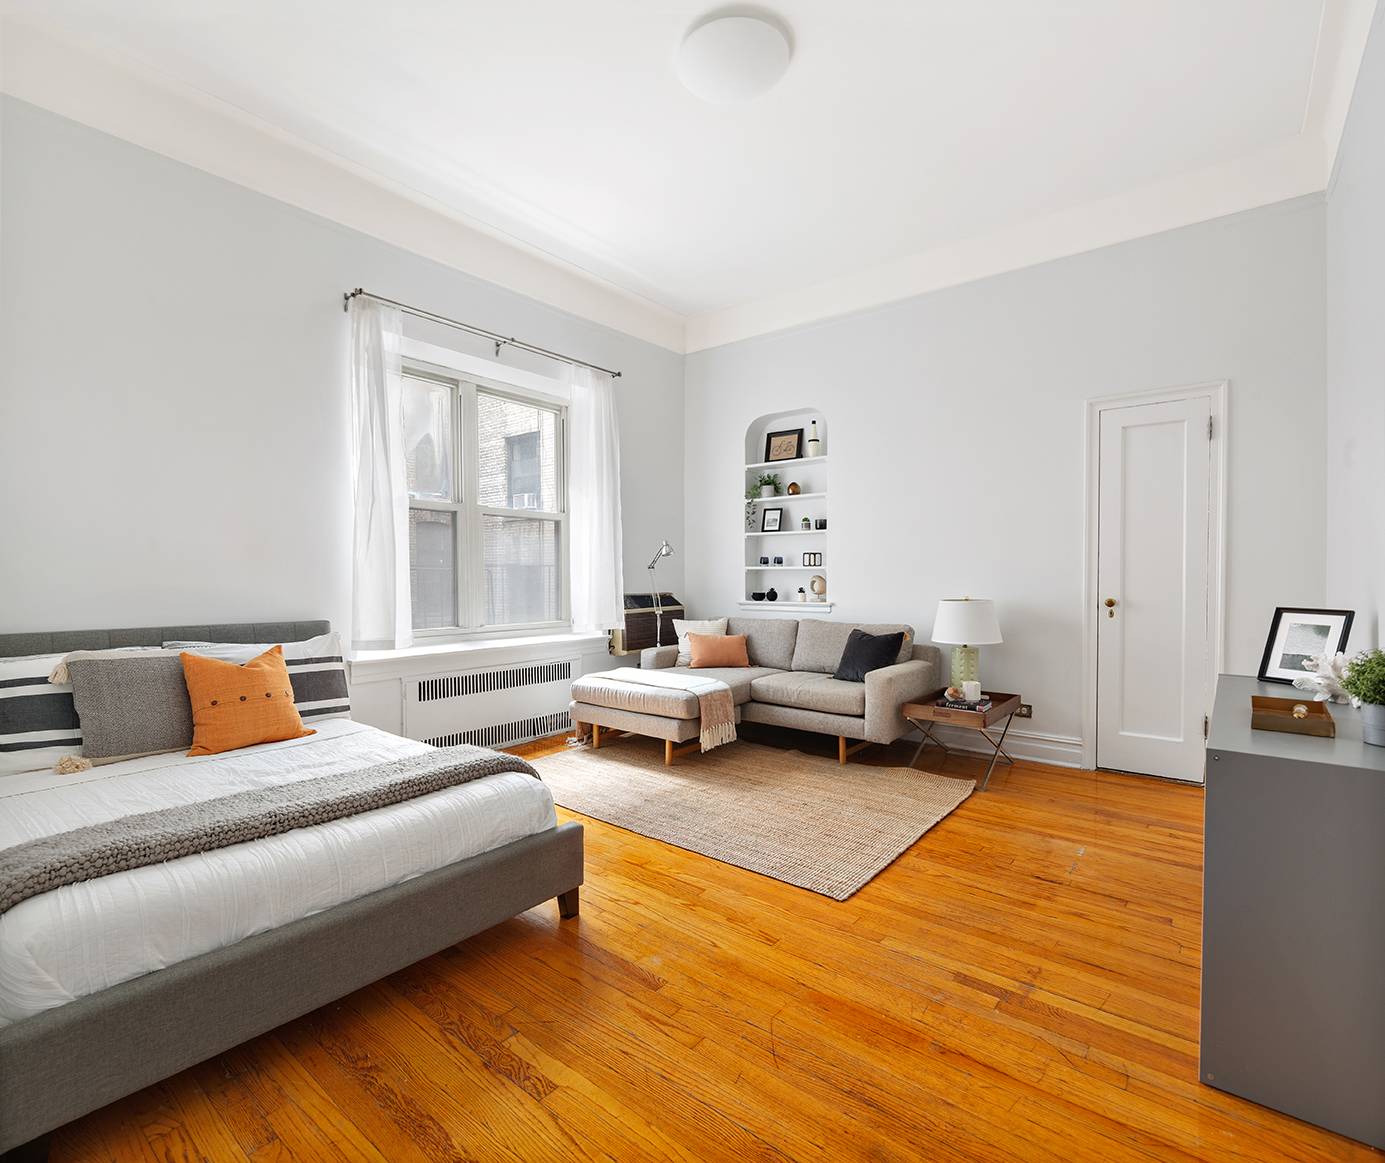 55 Pineapple Unit 2H is a spacious and serene studio located on one of Brooklyn Heights' most desirable blocks.